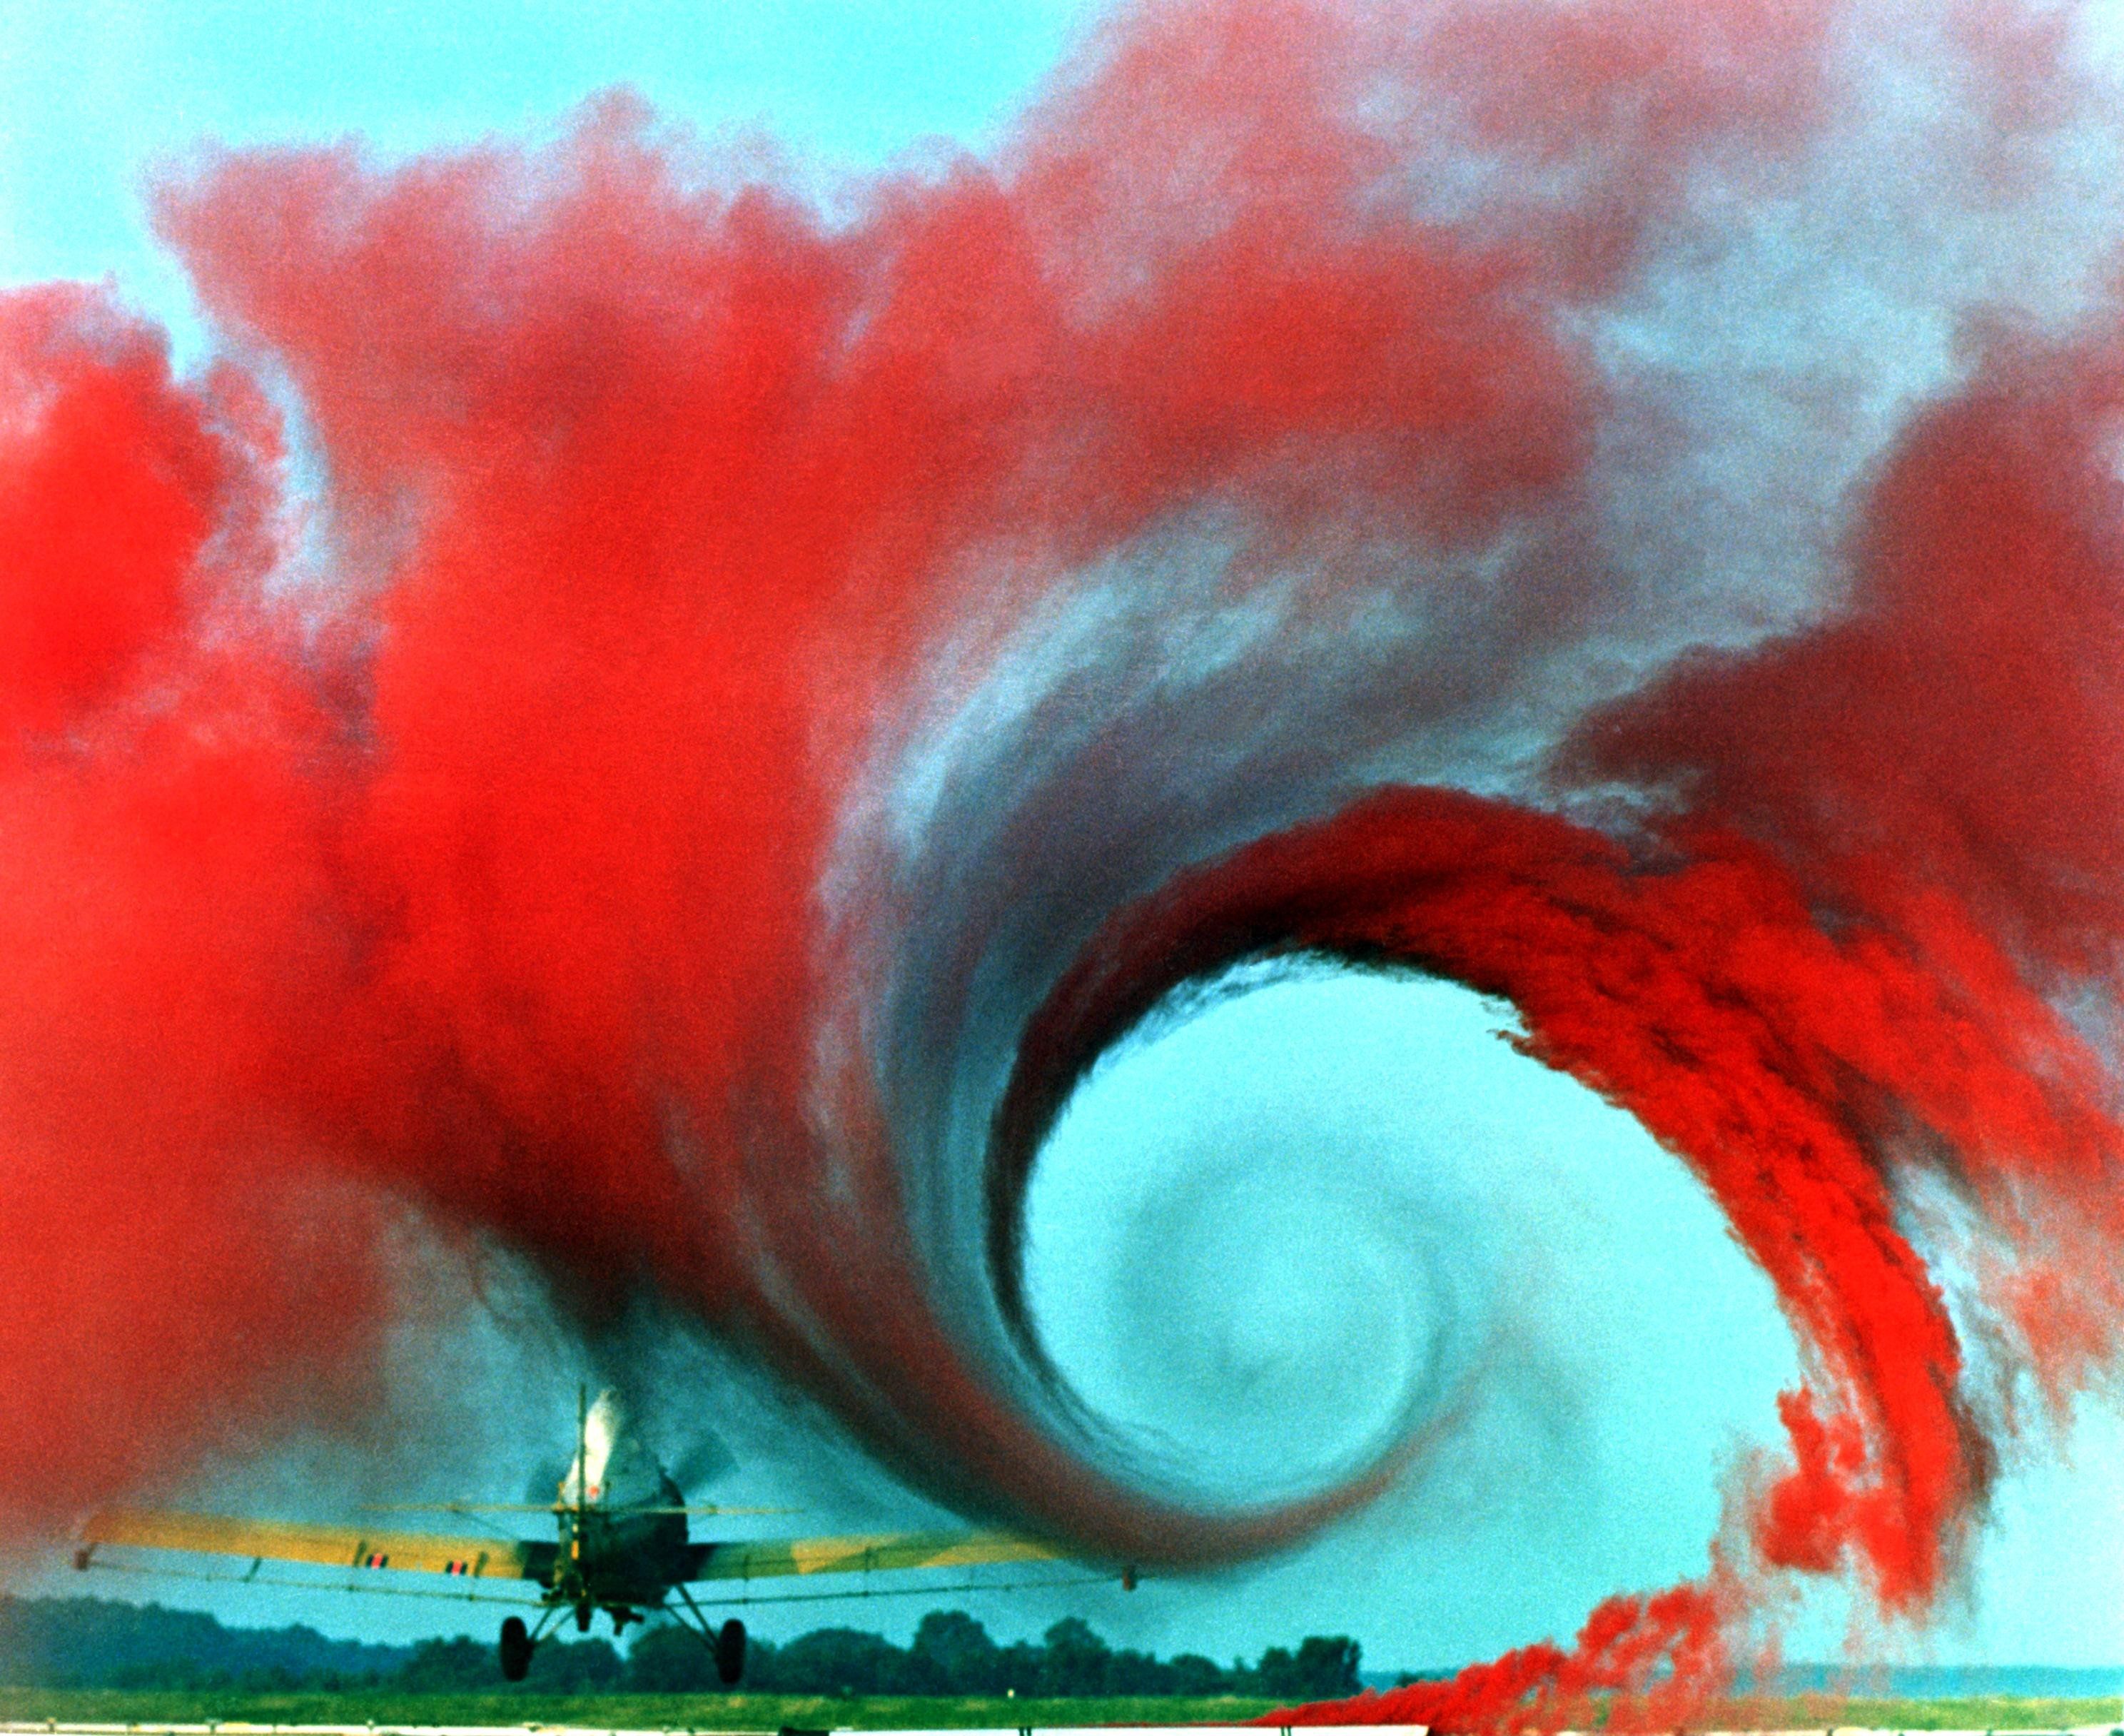 illustration of a vortex caused by an airplane